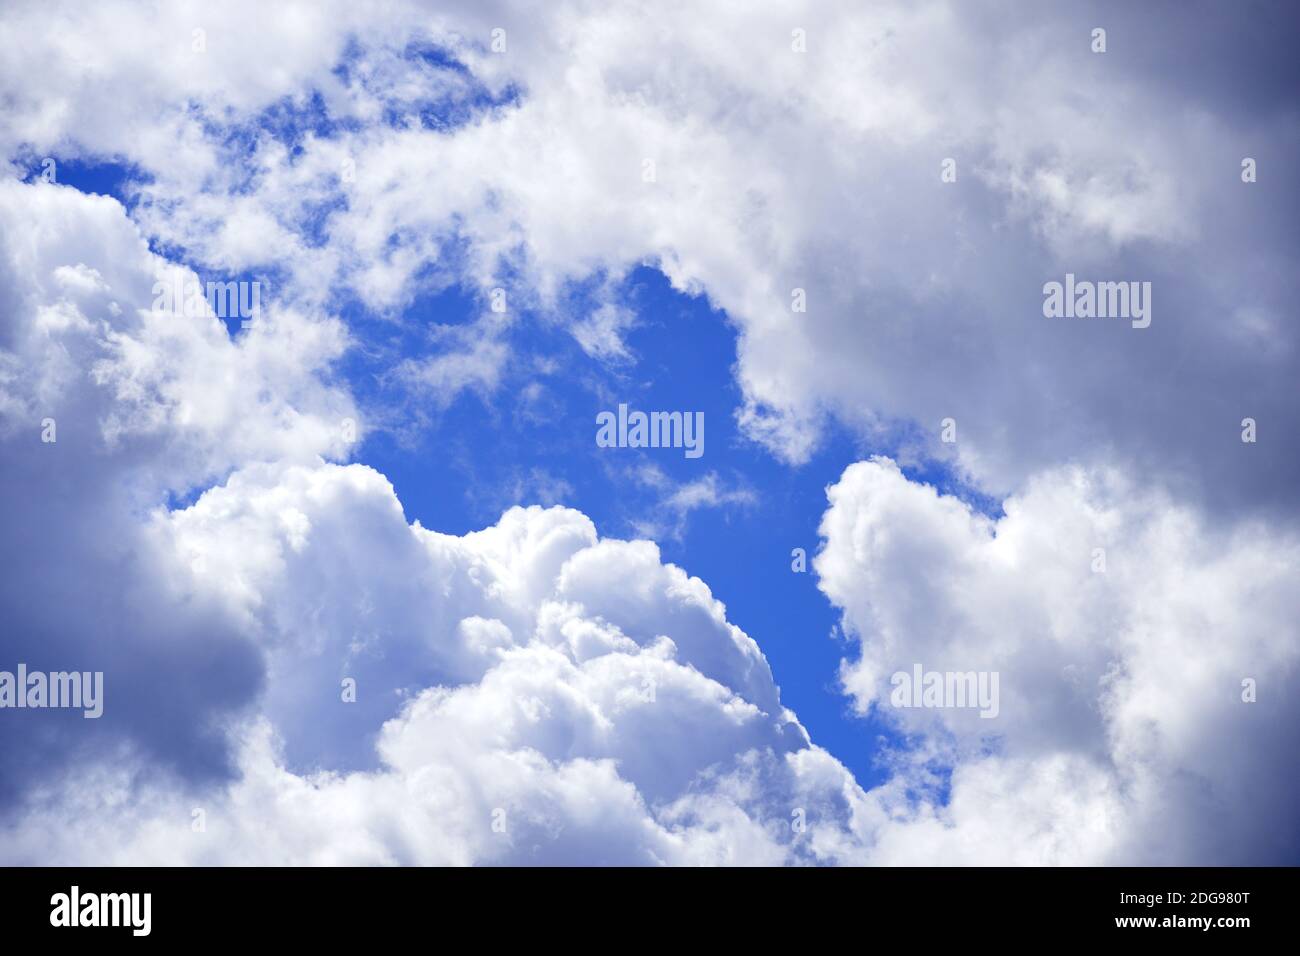 background of clouds over blue sky. concept clearing against bad weather Stock Photo